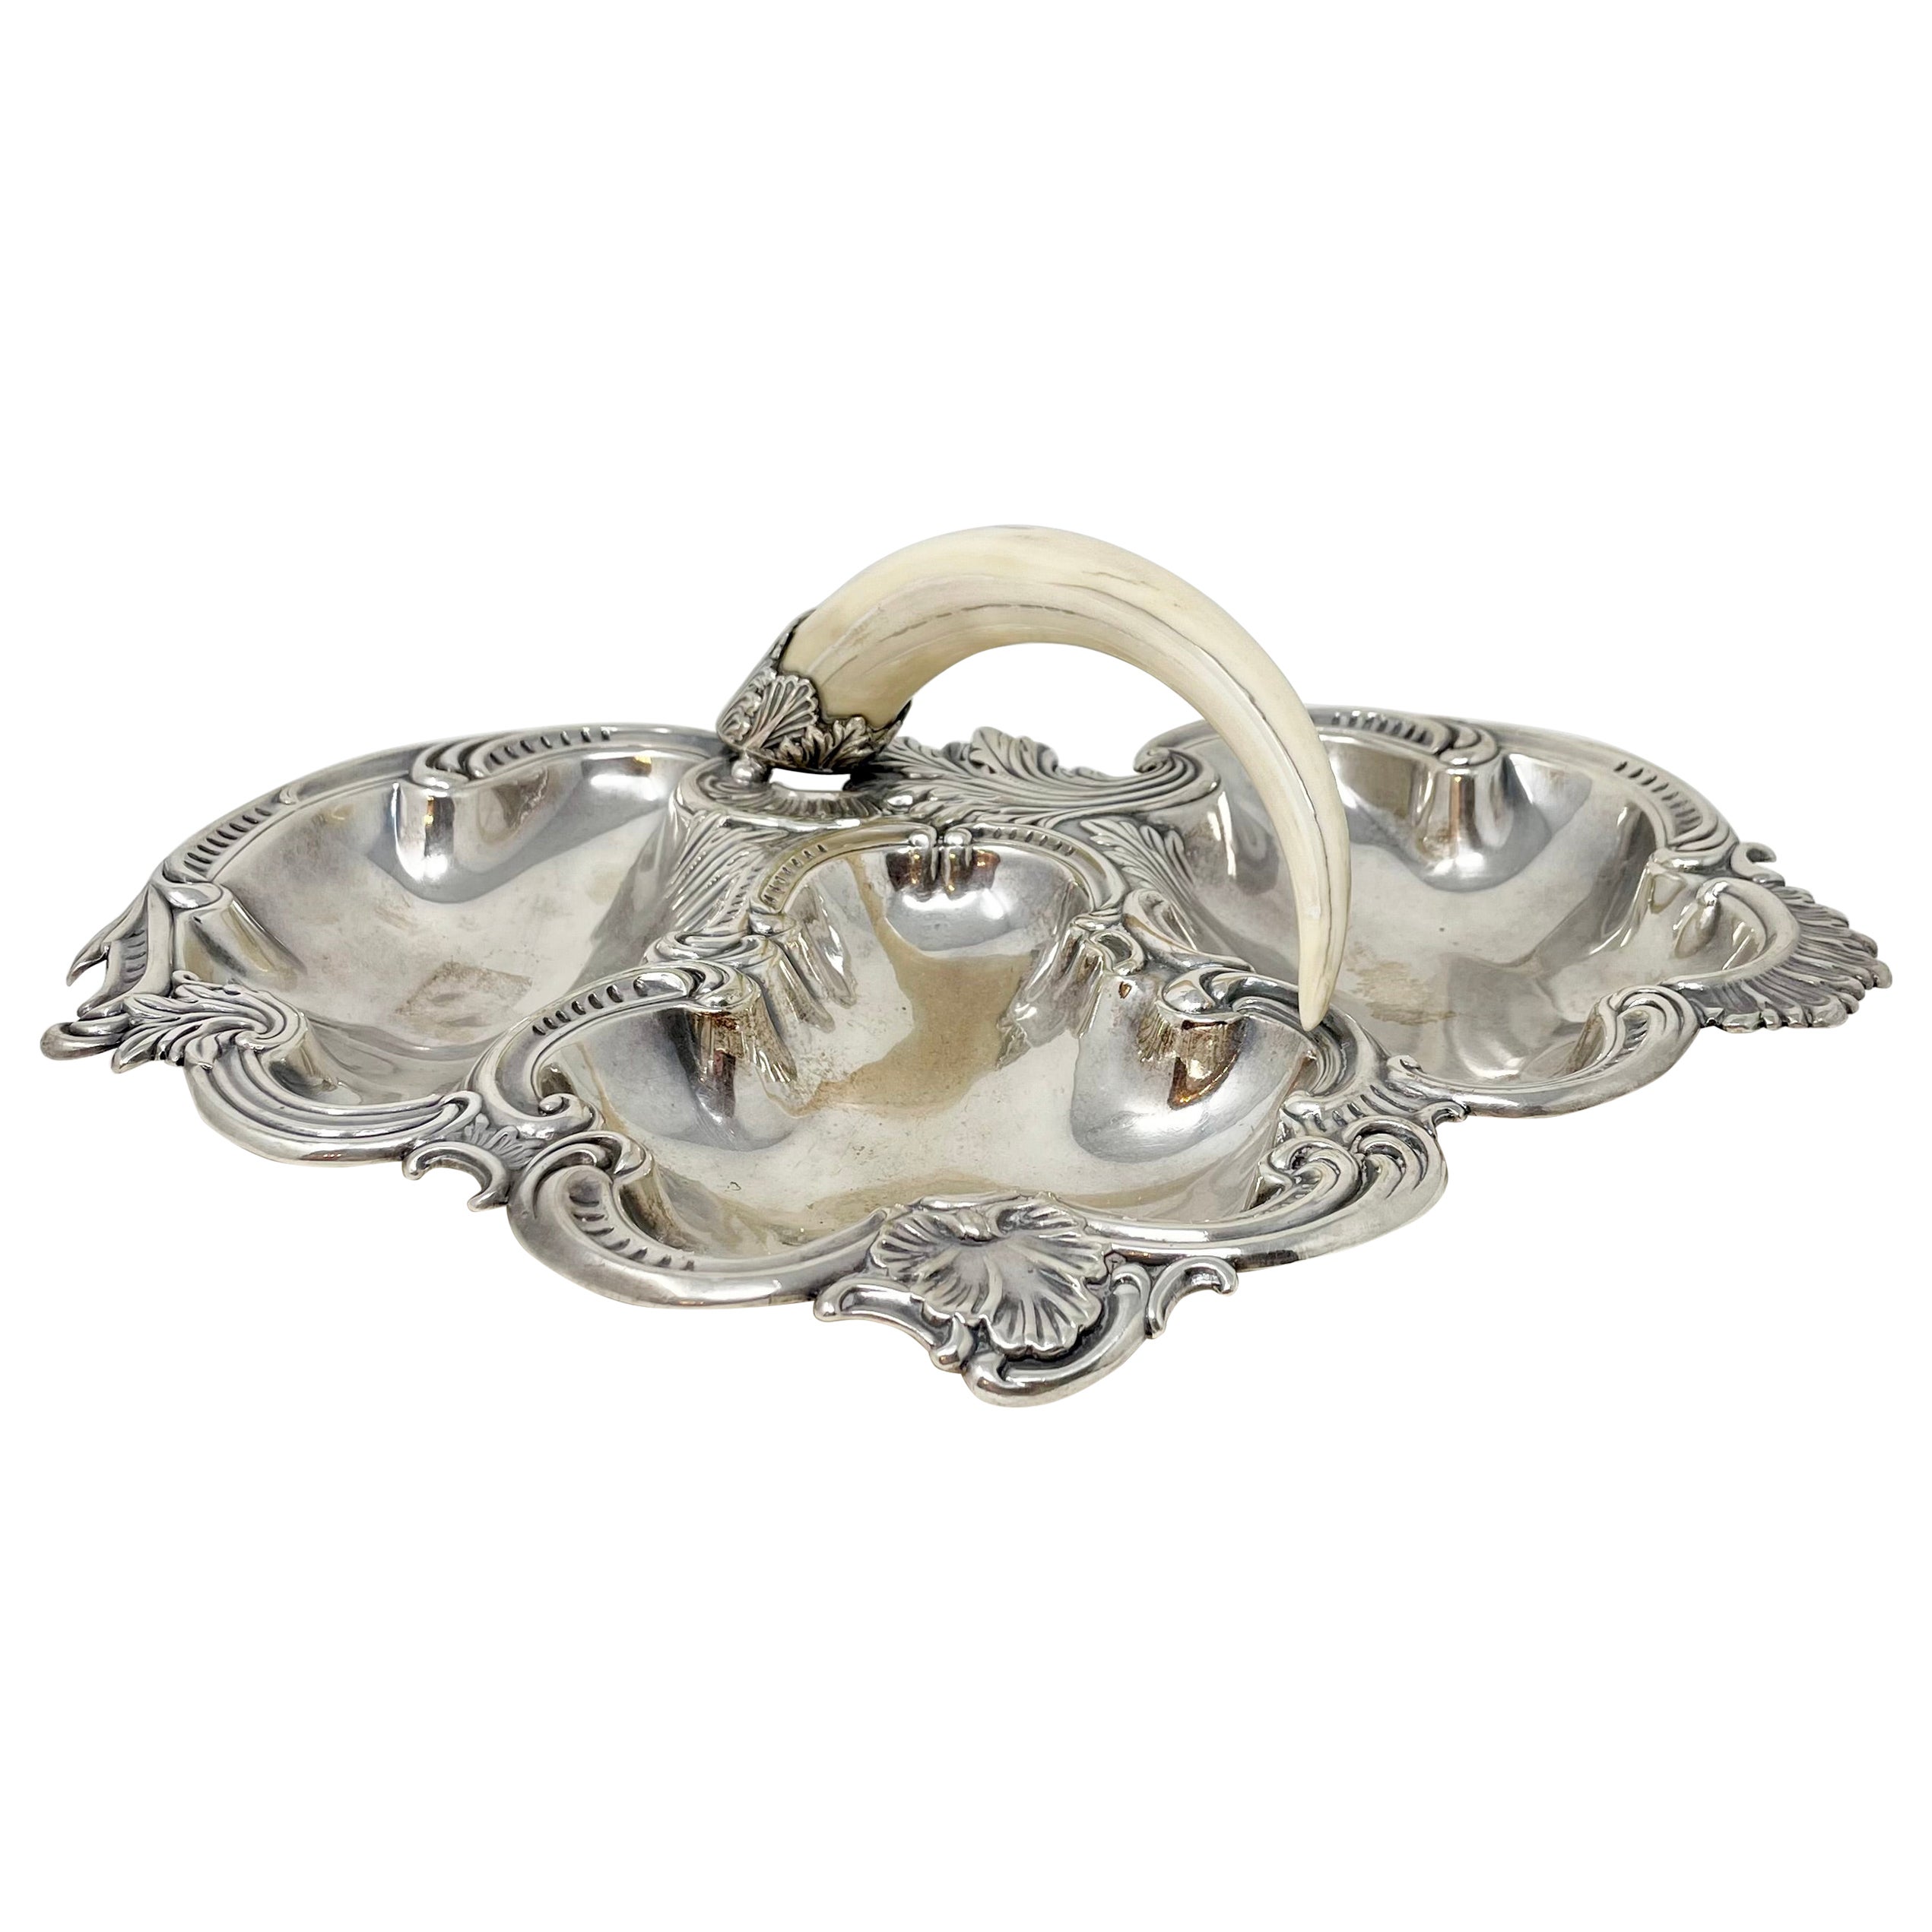 Antique English Sheffield Silver-Plate and Boar's Tusk Serving Dish, Circa 1900.